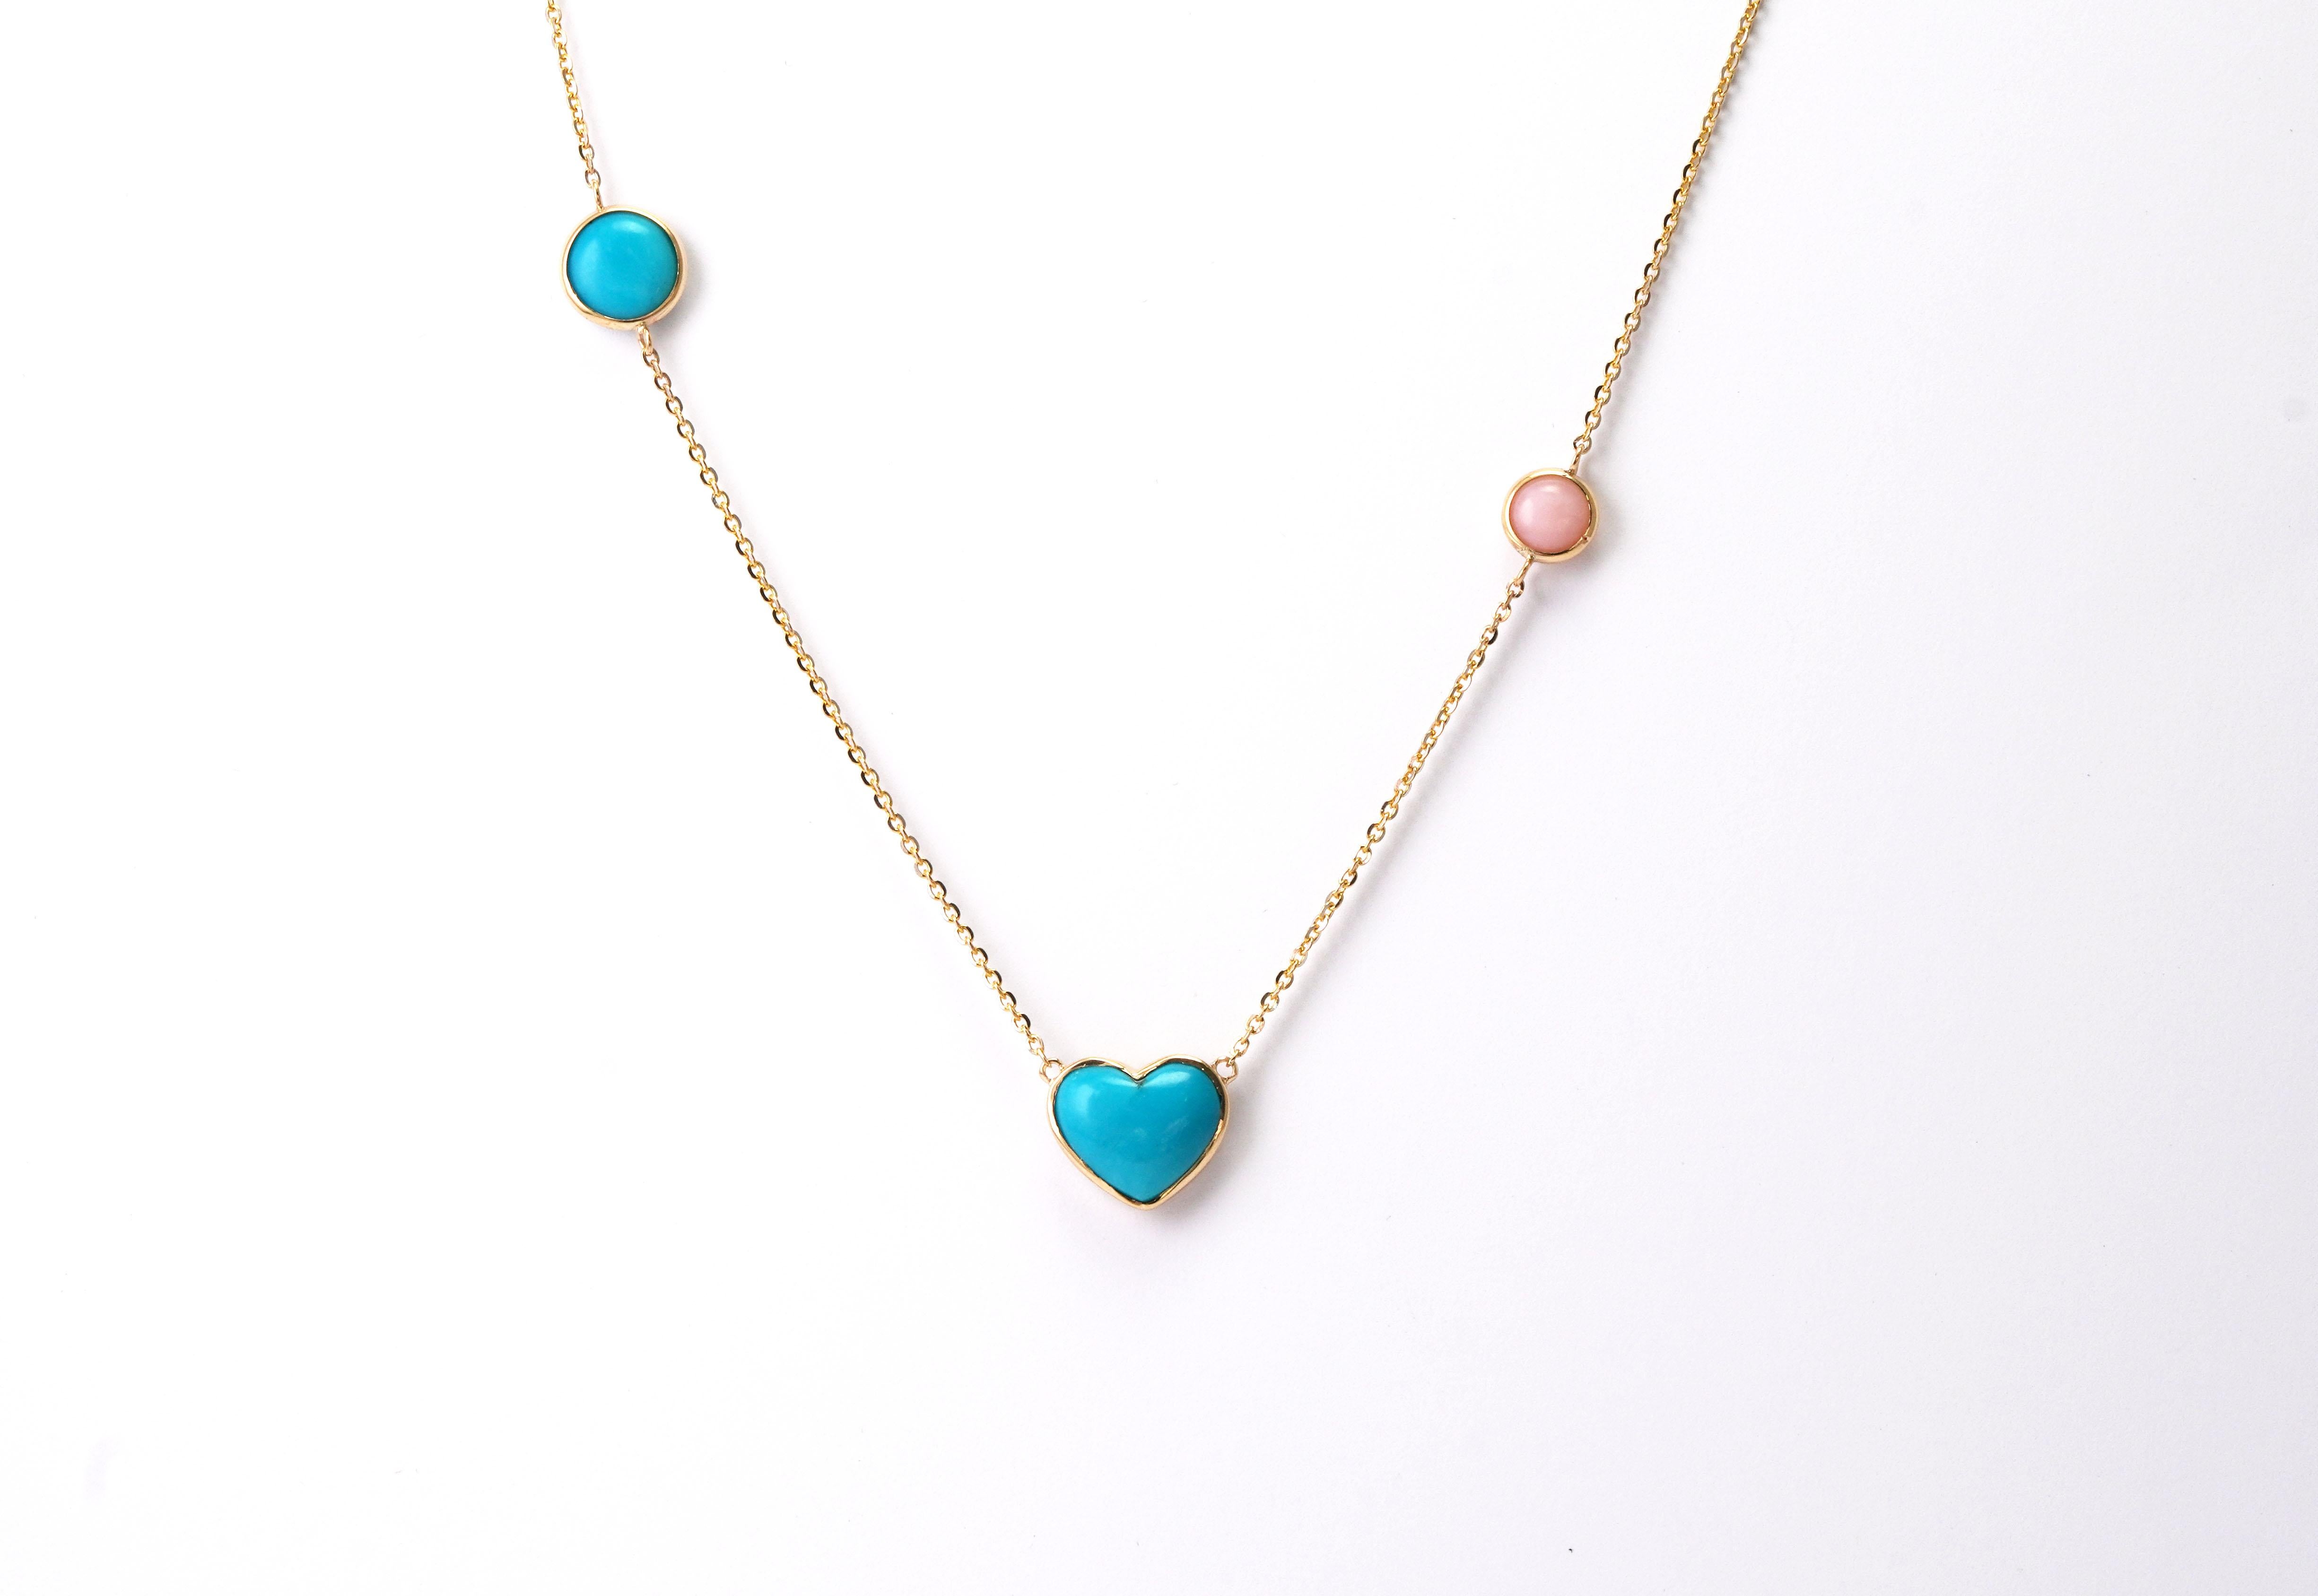 14 kt Gold Necklace with Turquoise and Pink Opal
Gold color: Yellow
Dimensions: 44-48 cm Length
Total weight: 4.02 grams

Set with:
- Turquoise
Color: Blue
Cut: Cabochon
 - Opal
Color: Pink
Cut: Cabochon

